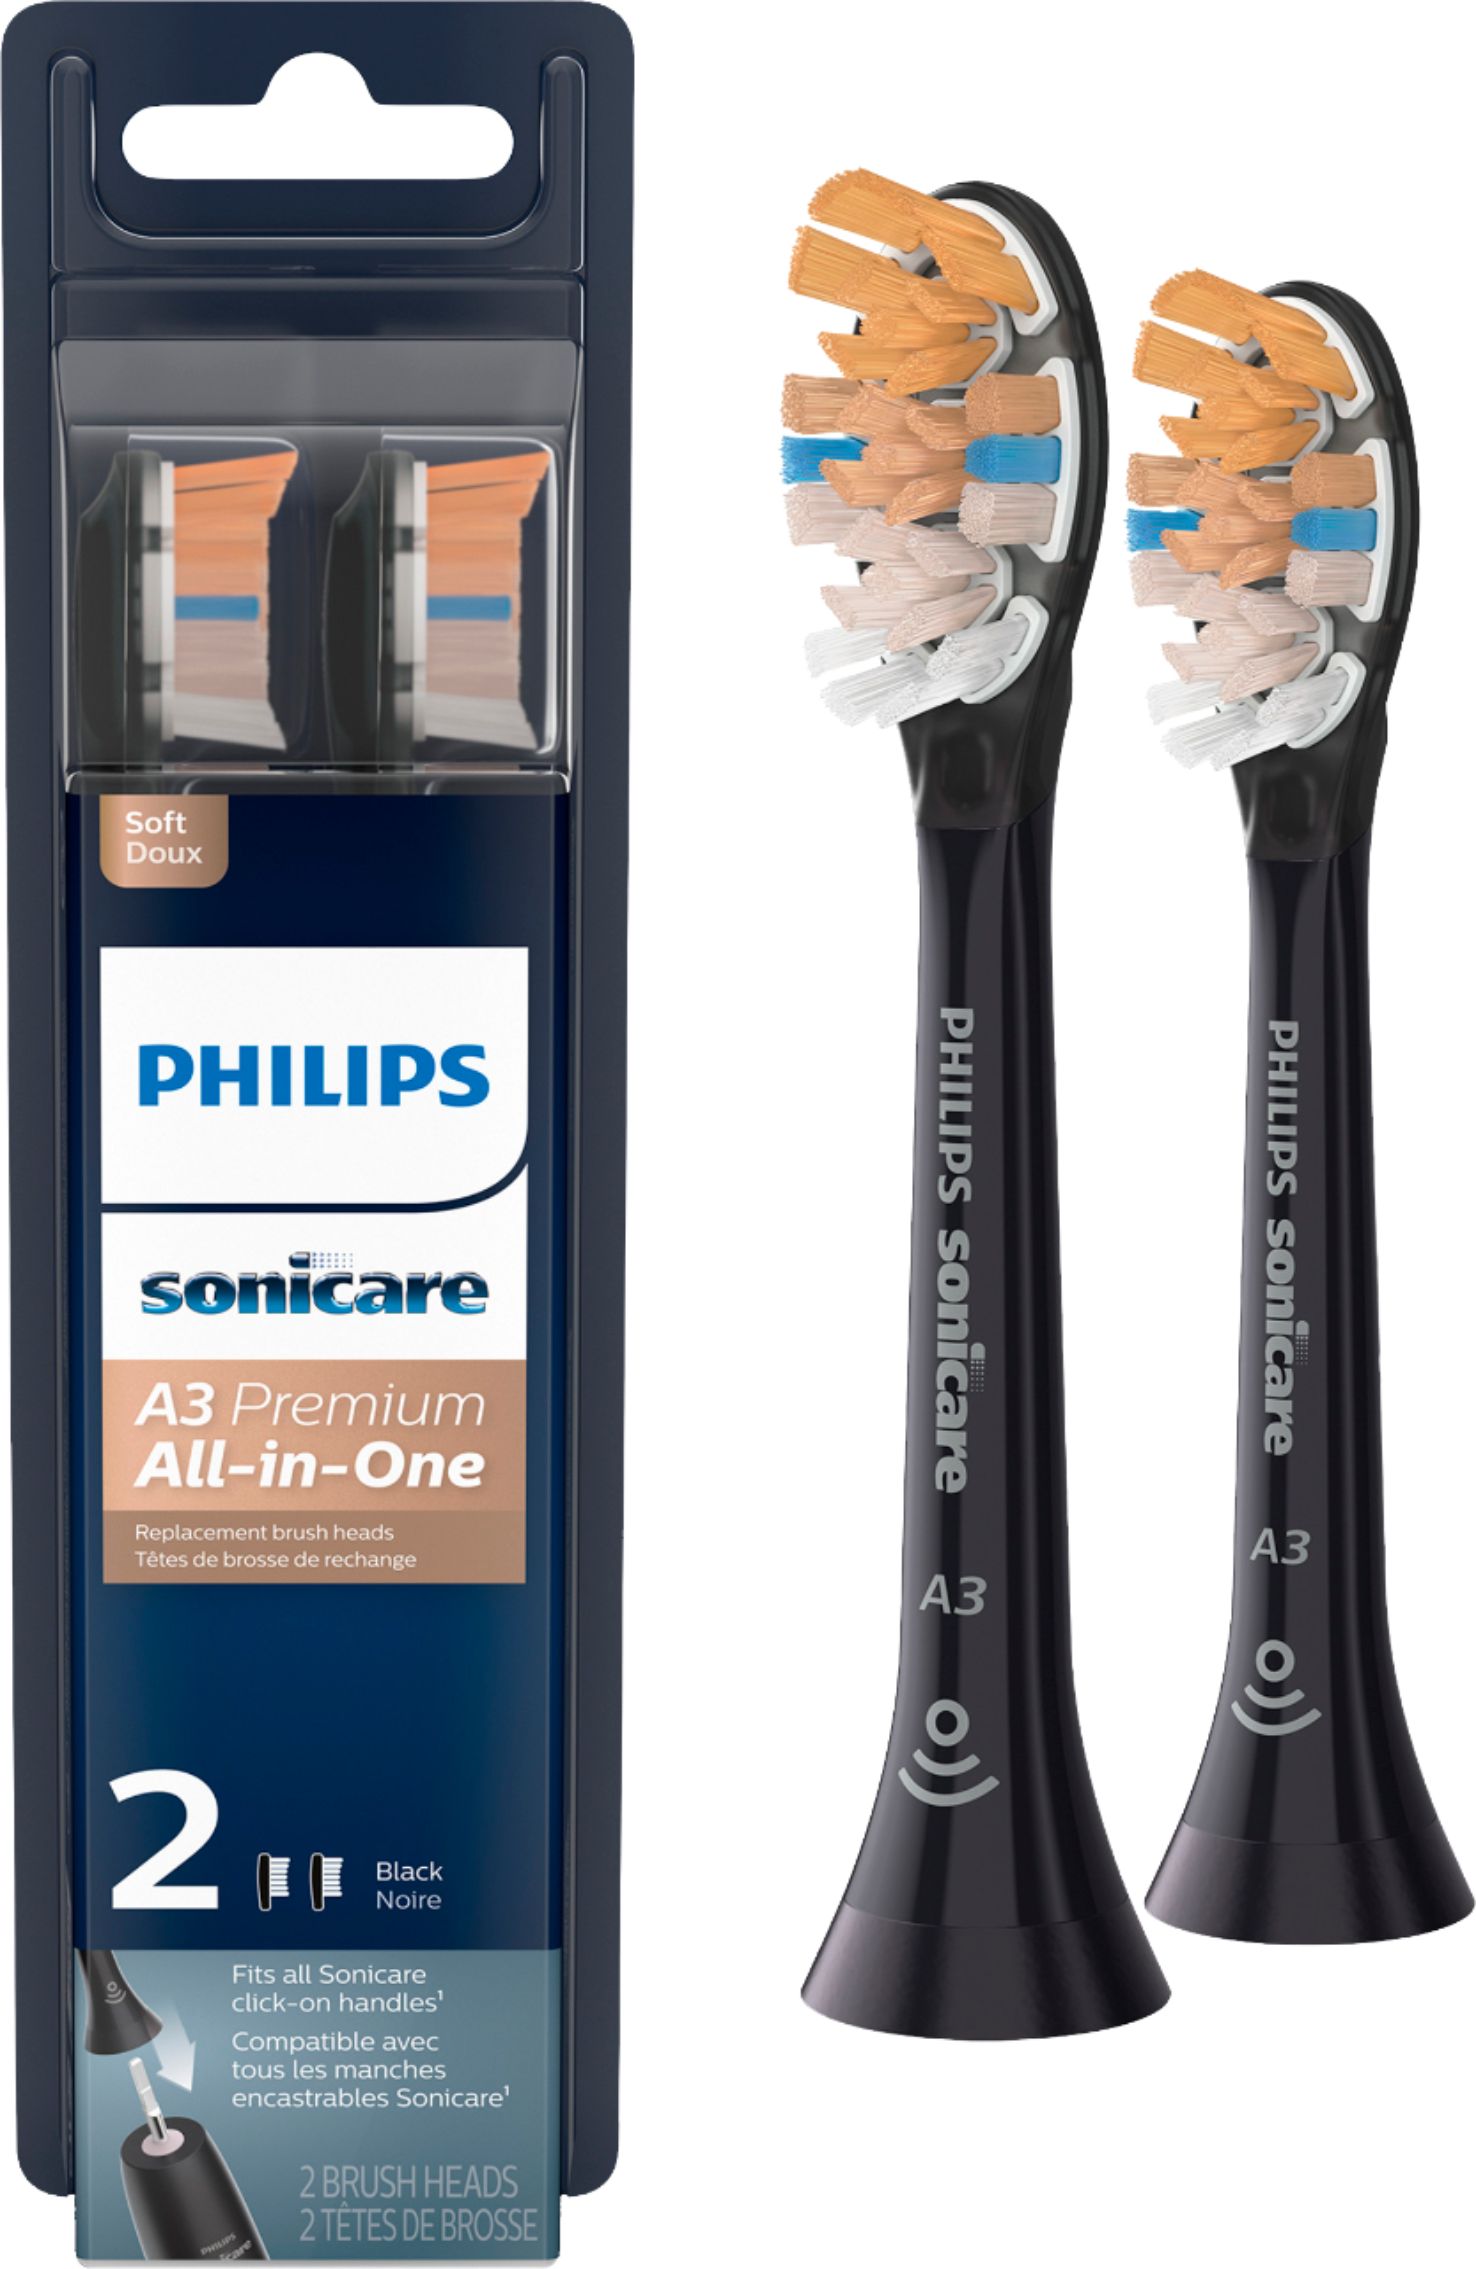 Buy Philips Sonicare A3 Premium All-in-One Toothbrush Head, 2